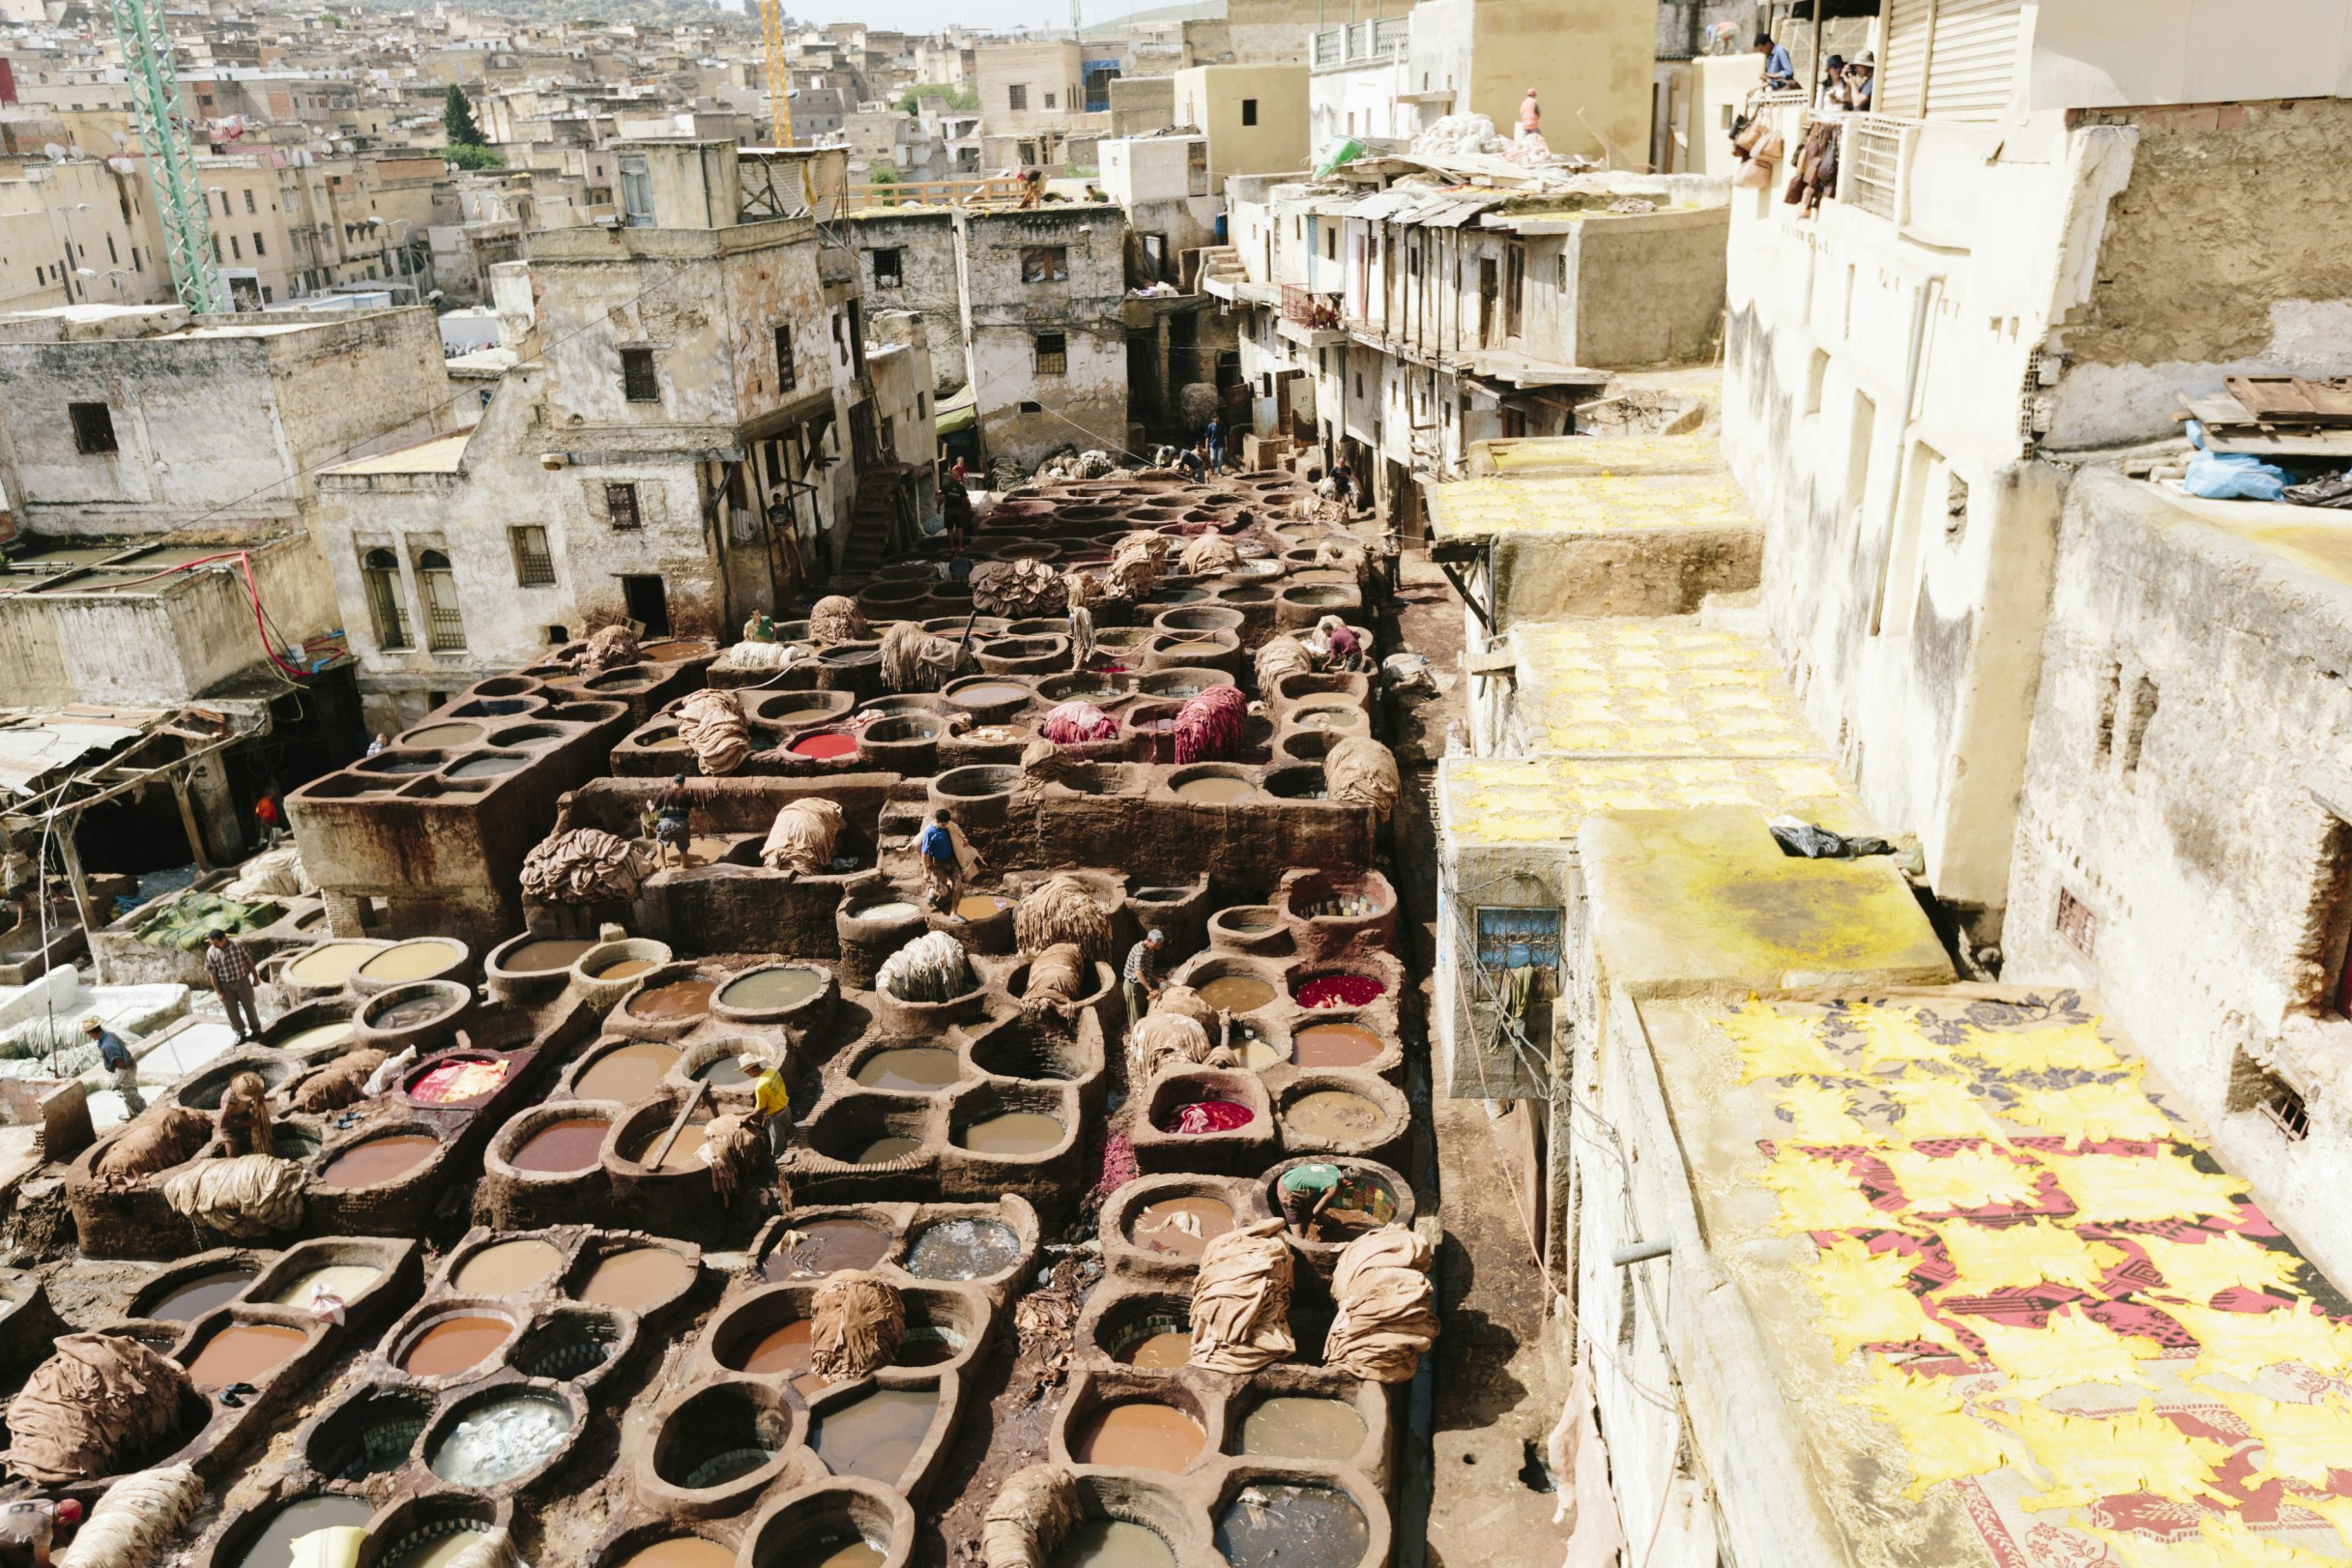 Top of every tourists list when visiting Fez seems to be a visit to the Chaouwara (Chouara) Tanneries. With the help of a guide you are taken into one of the many leather shops that surround the open air tanning pits and with some explanation of the dying process, you will also be encouraged to buy some leather products. It is a beautiful sight and worth a visit.